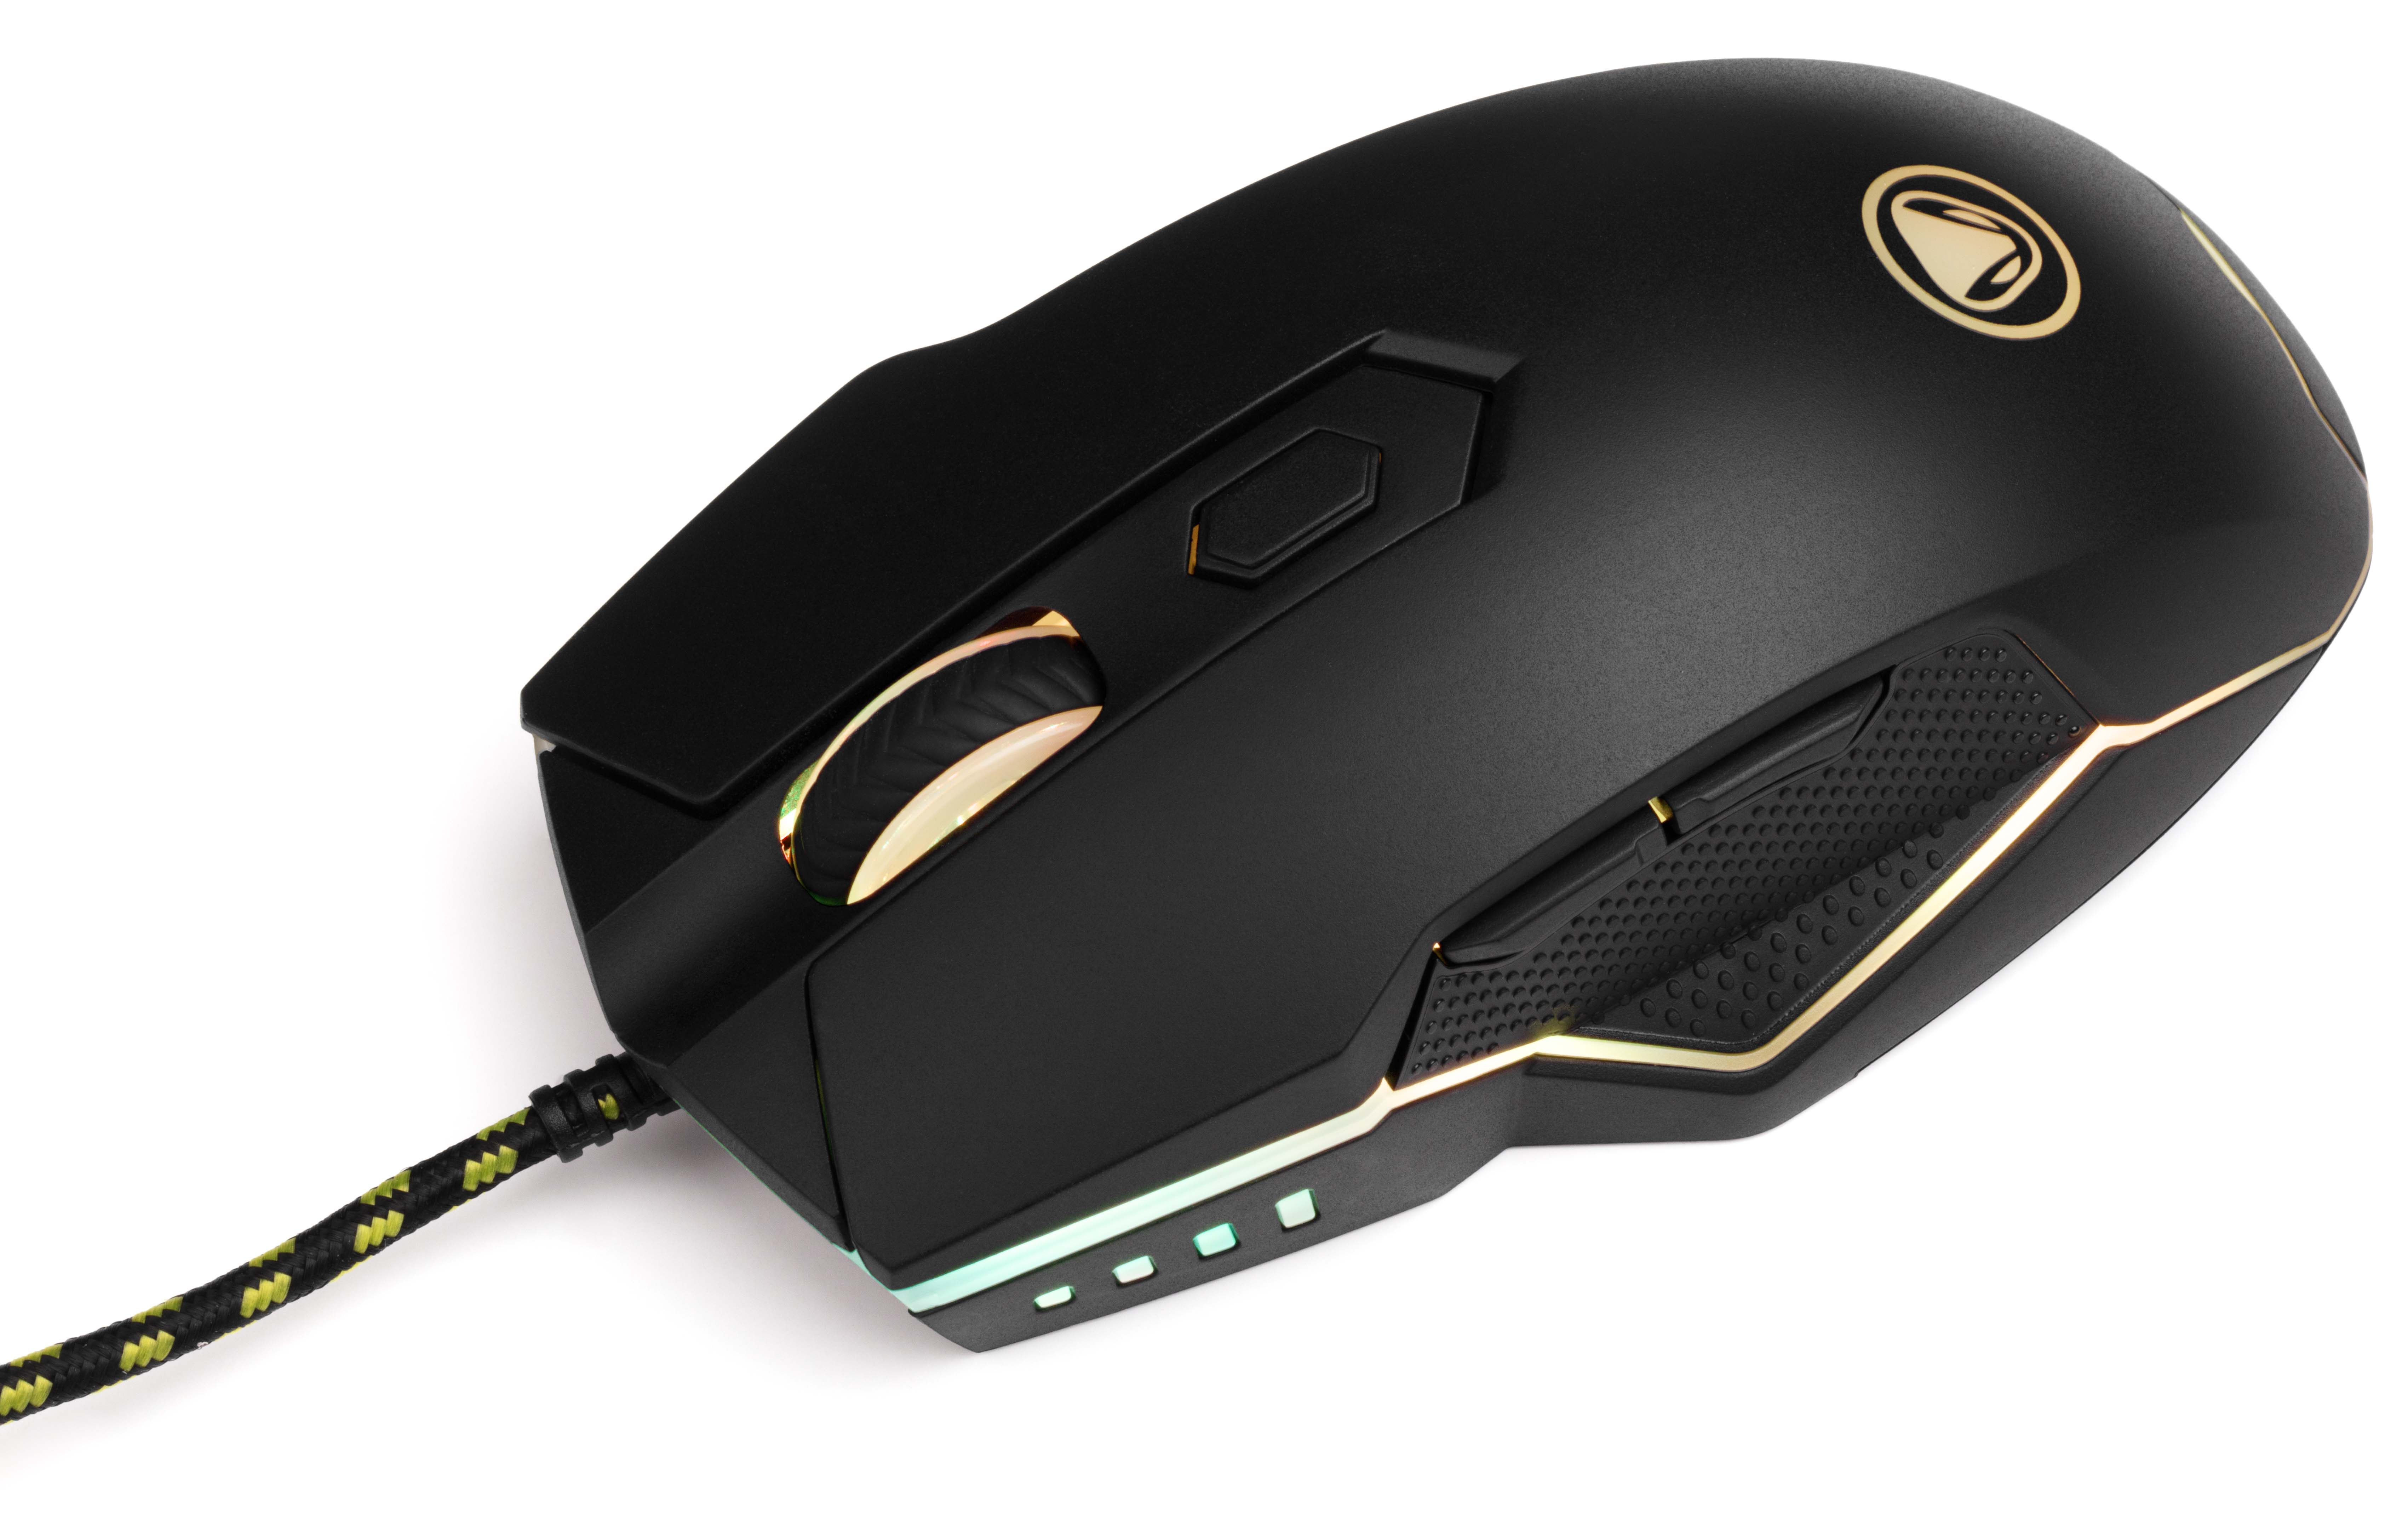 SNAKEBYTE Game:Mouse Ultra™ Gaming-Maus, Schwarz